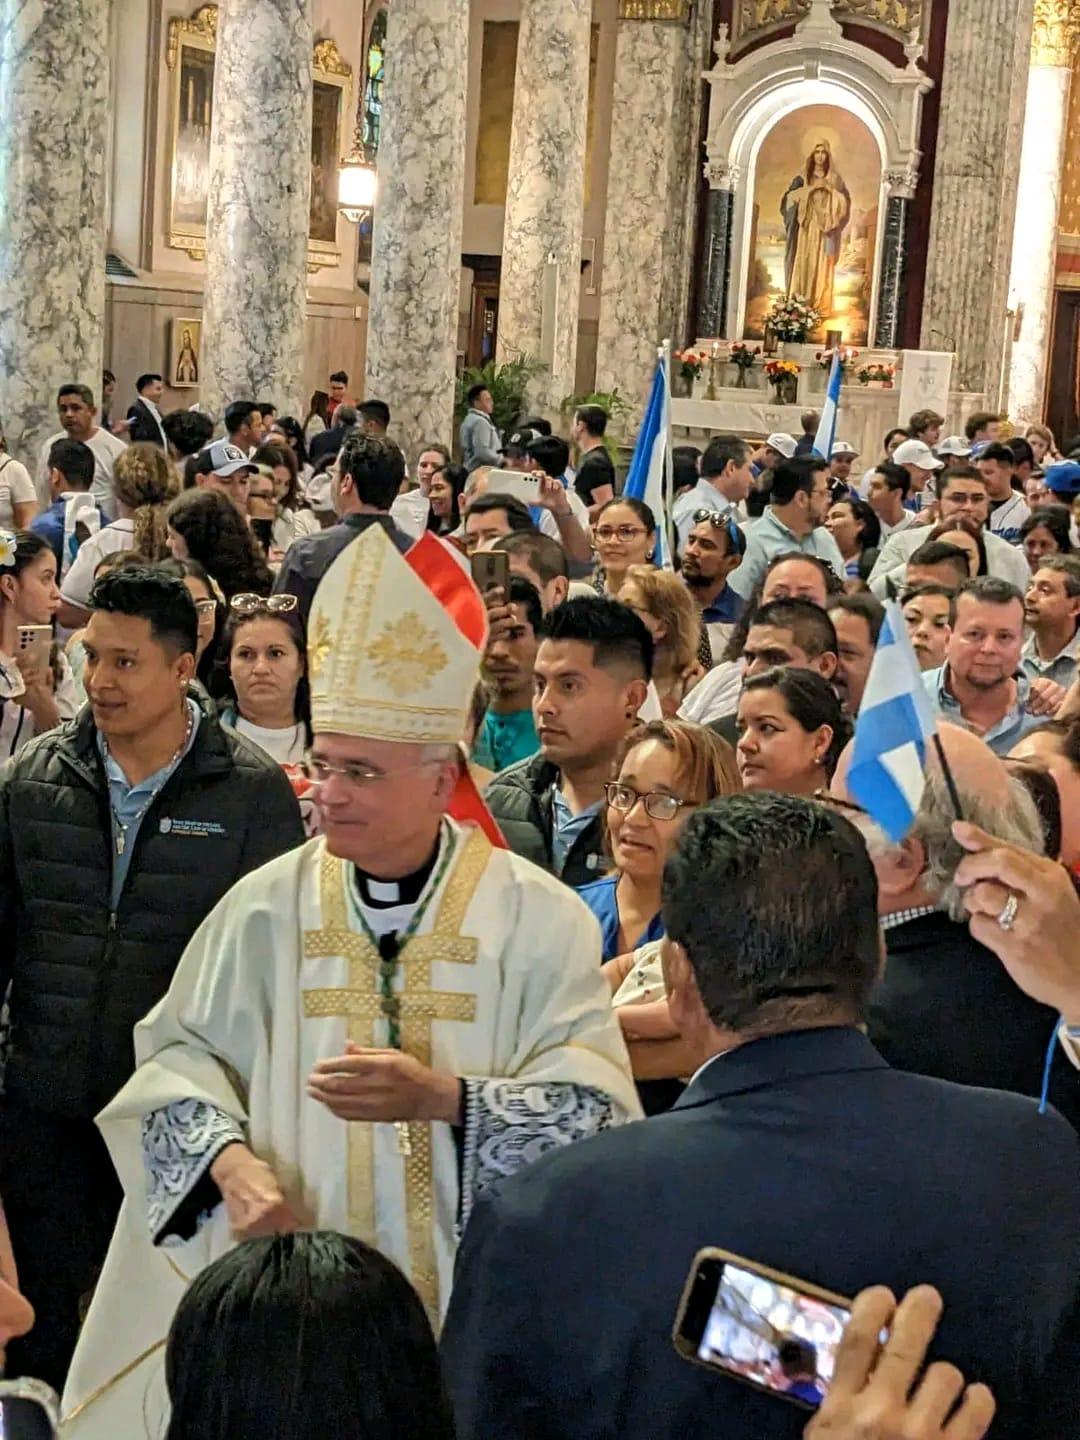 "The resistance lives", say exiles after meeting in Chicago with Bishop Báez